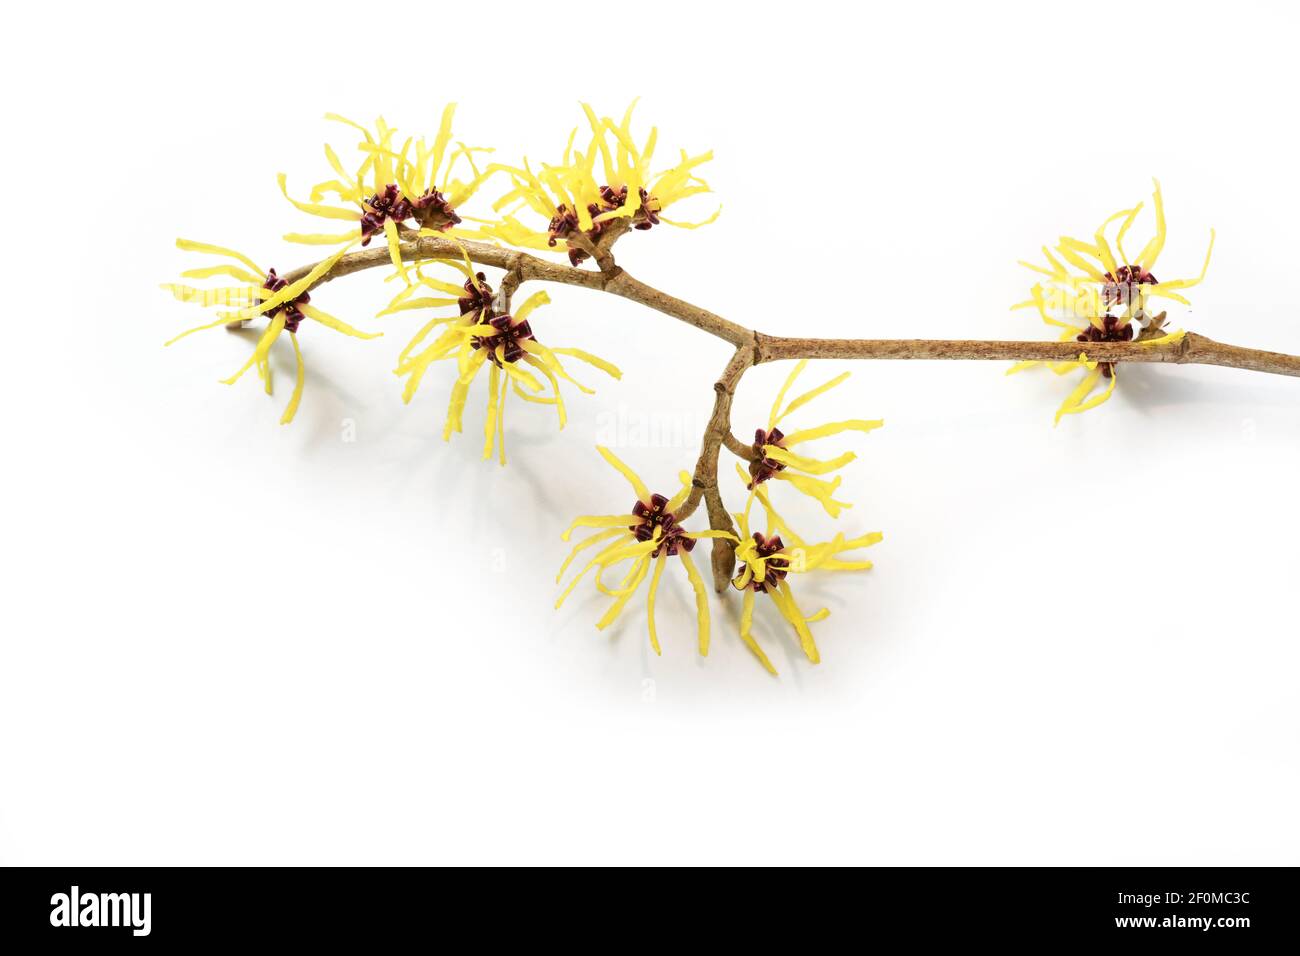 Branch with yellow witch hazel (Hamamelis) flowers, the medical plant is used in skin care, natural cosmetics and alternative medicine, isolated with Stock Photo